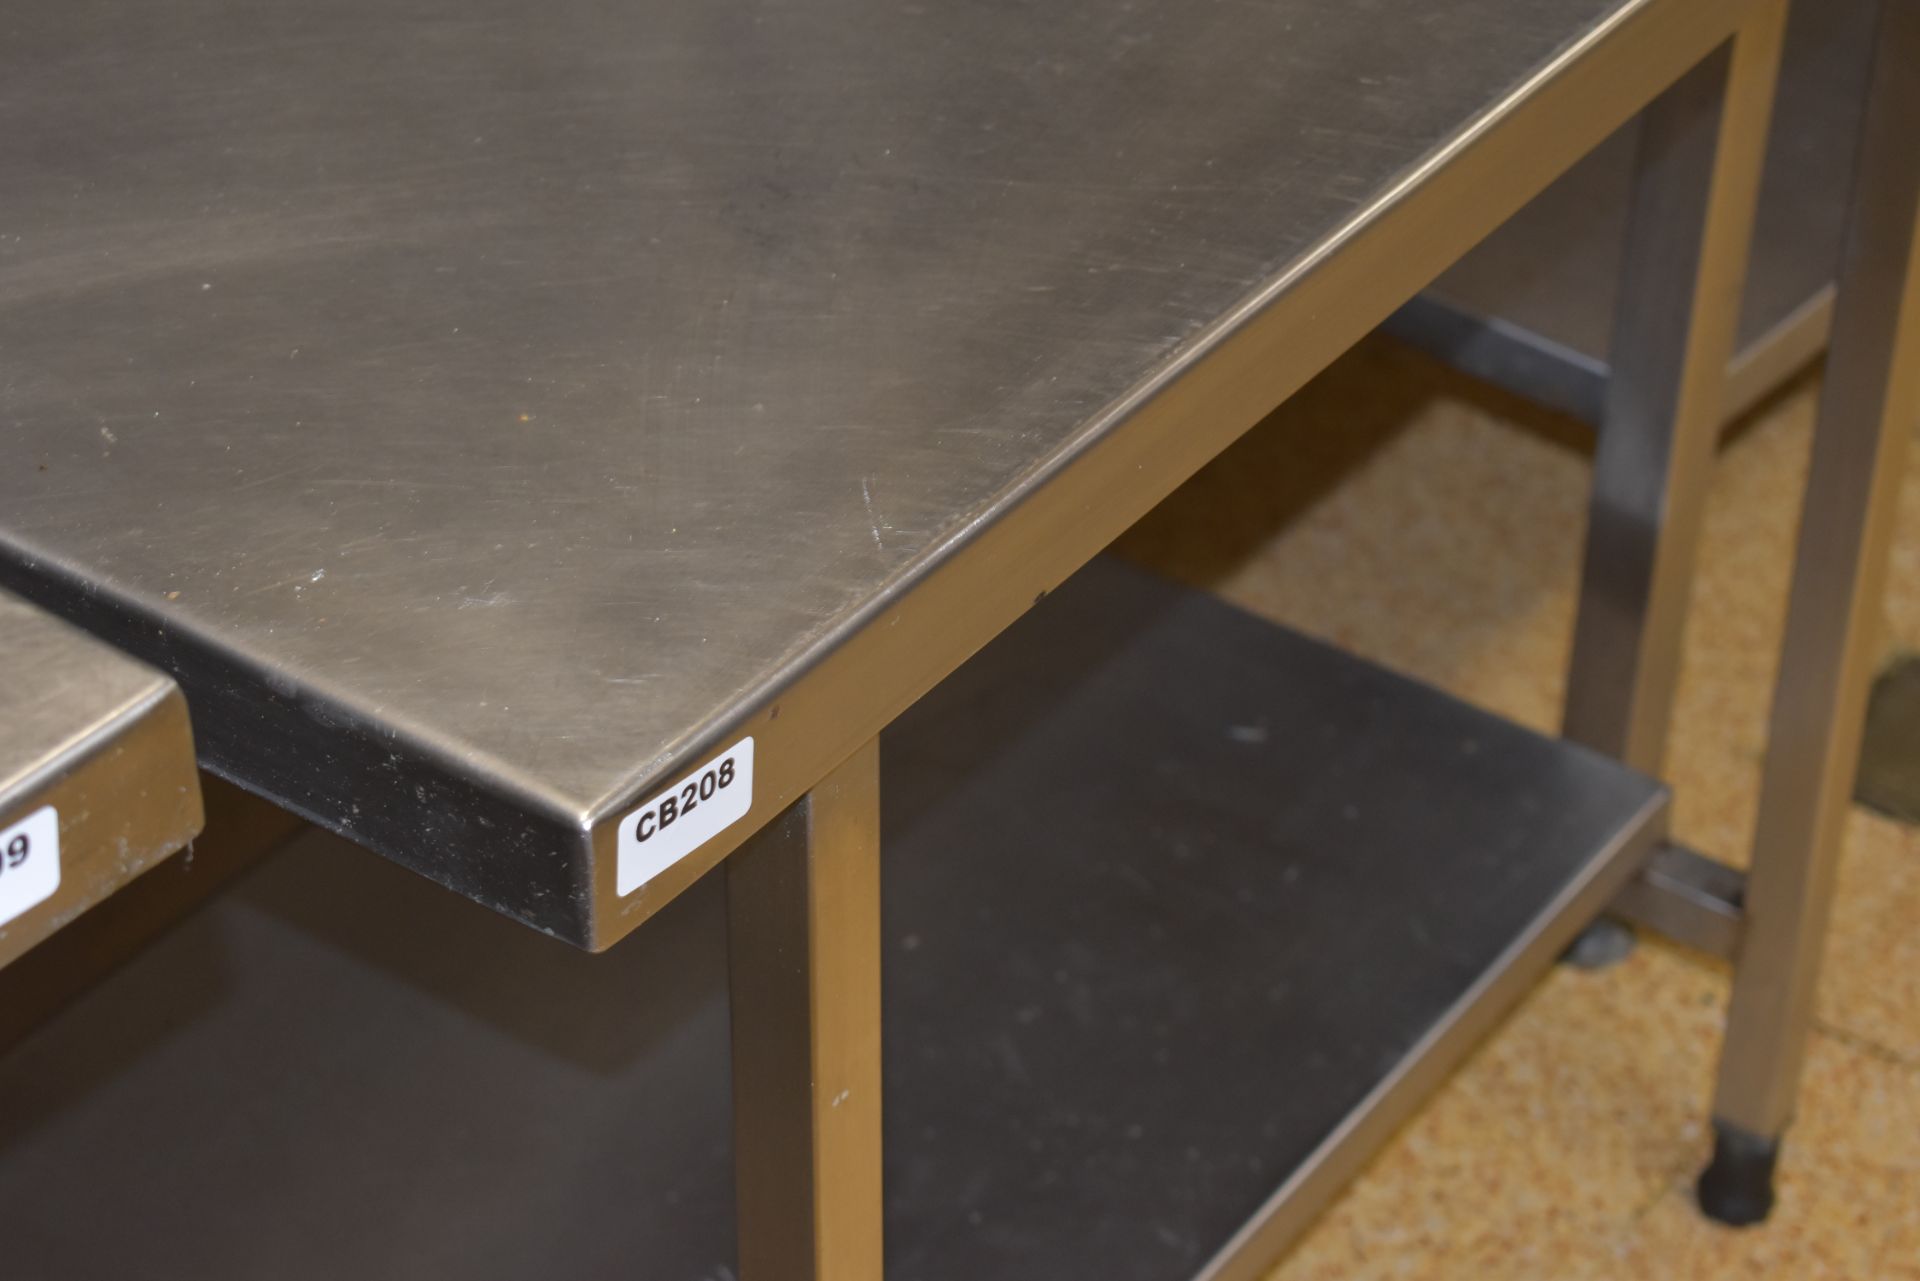 1 x Stainless Steel Prep Table With Overhead Utensil Hanging Rails and Undershelf - H76 / 175 x - Image 5 of 5